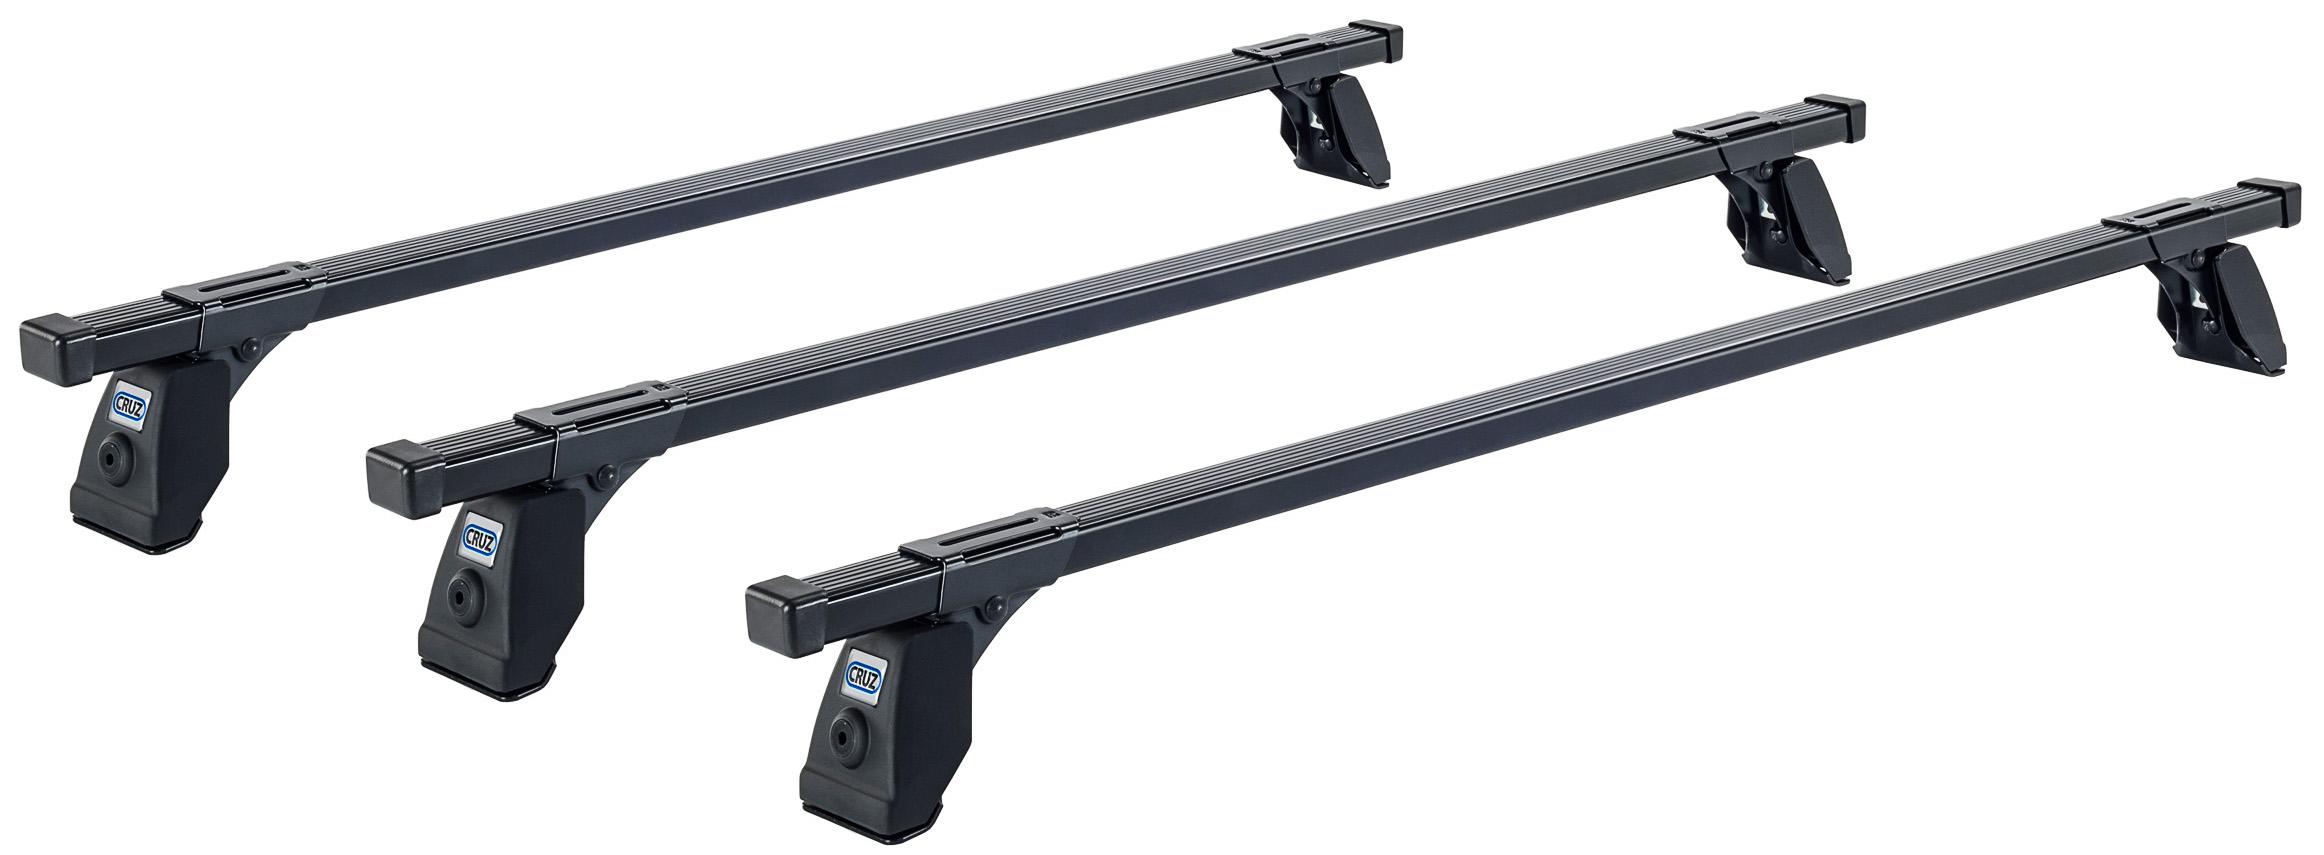 Cruz Commercial Roof Bars 30 X 20 922-409 - Pack Of 2